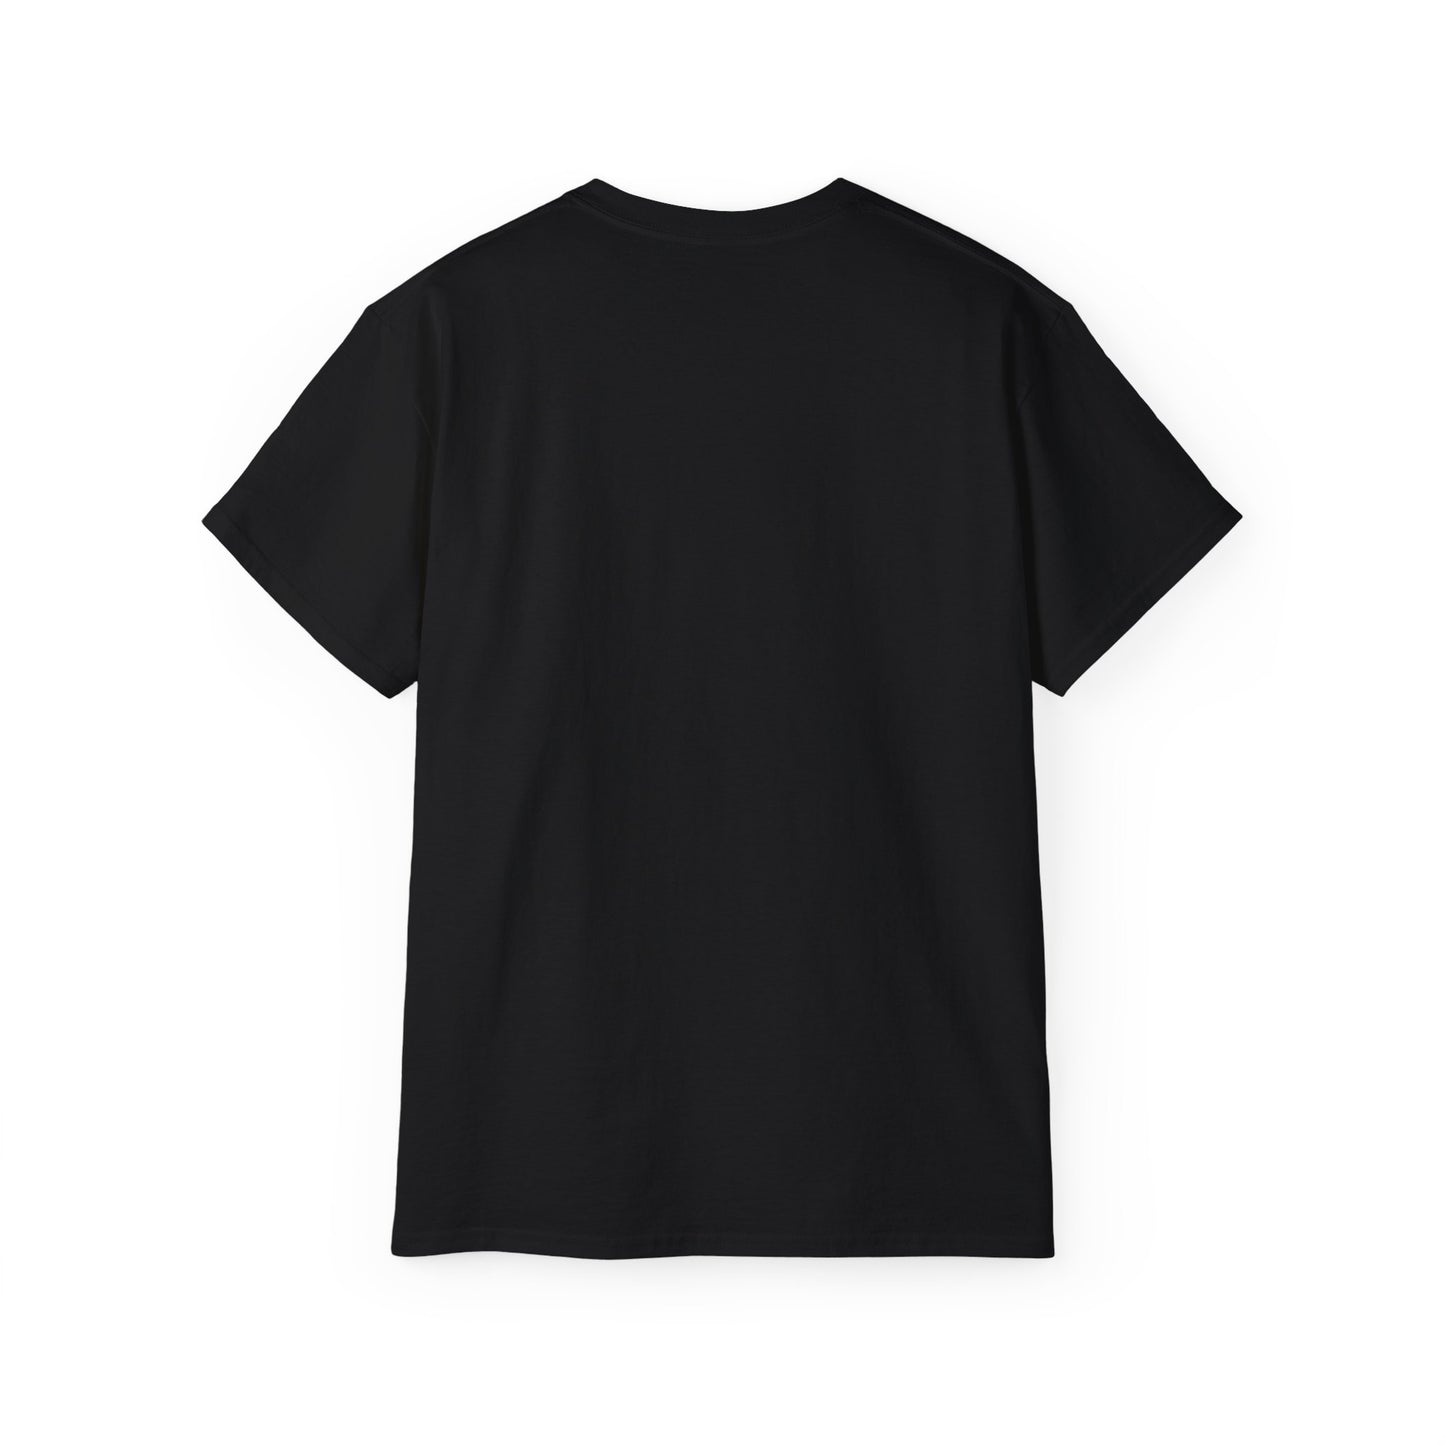 Limited Edition Seville Fair in Miami Black classic customizable tee